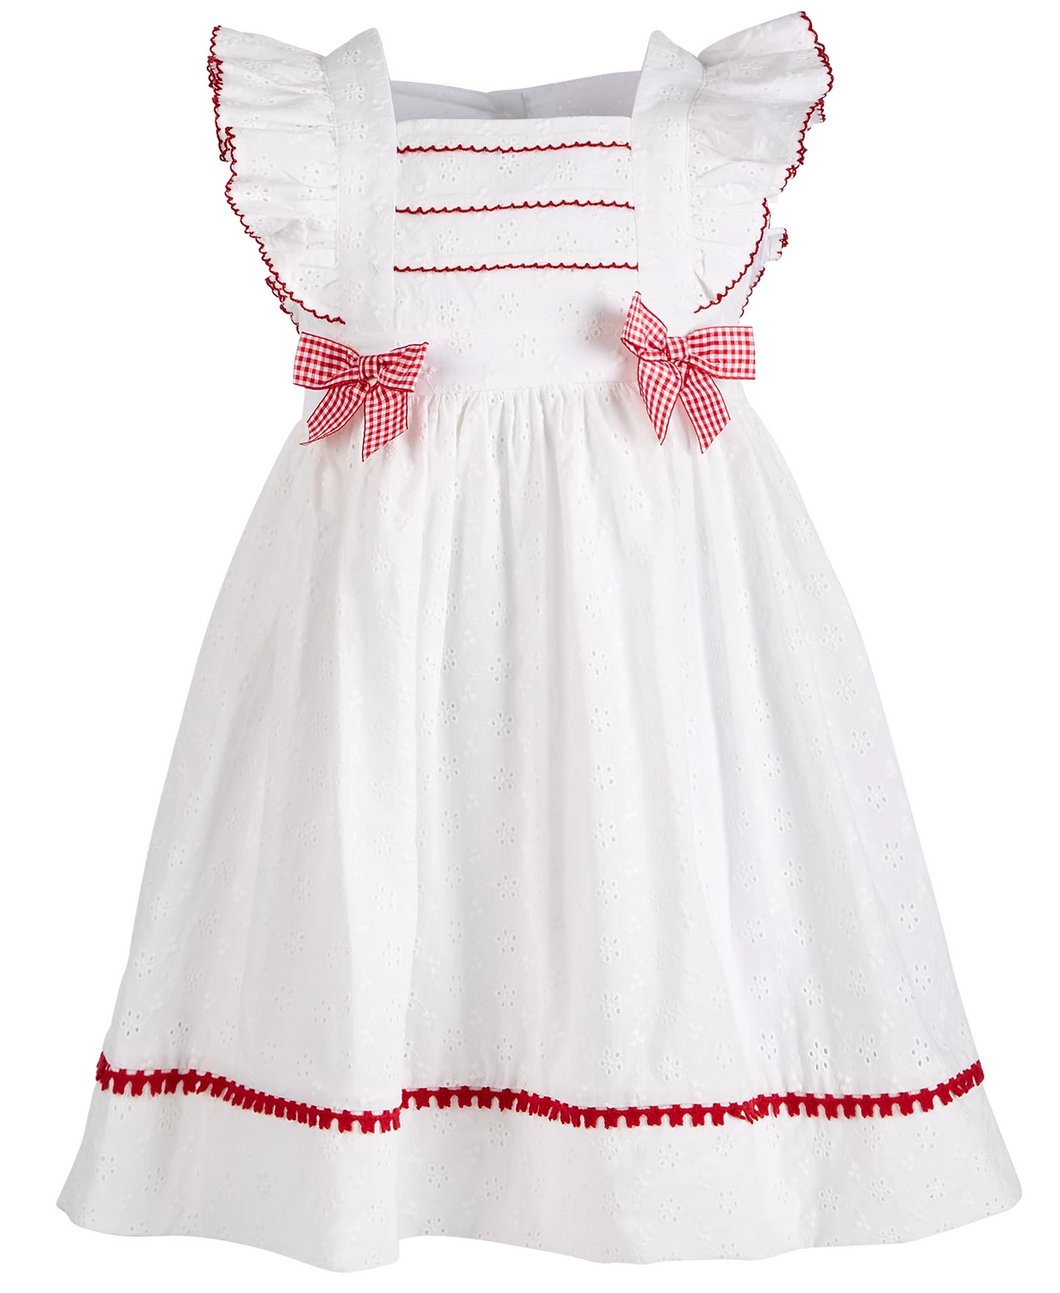 Bonnie Jean Eyelet-Embroidered Pinafore Dress